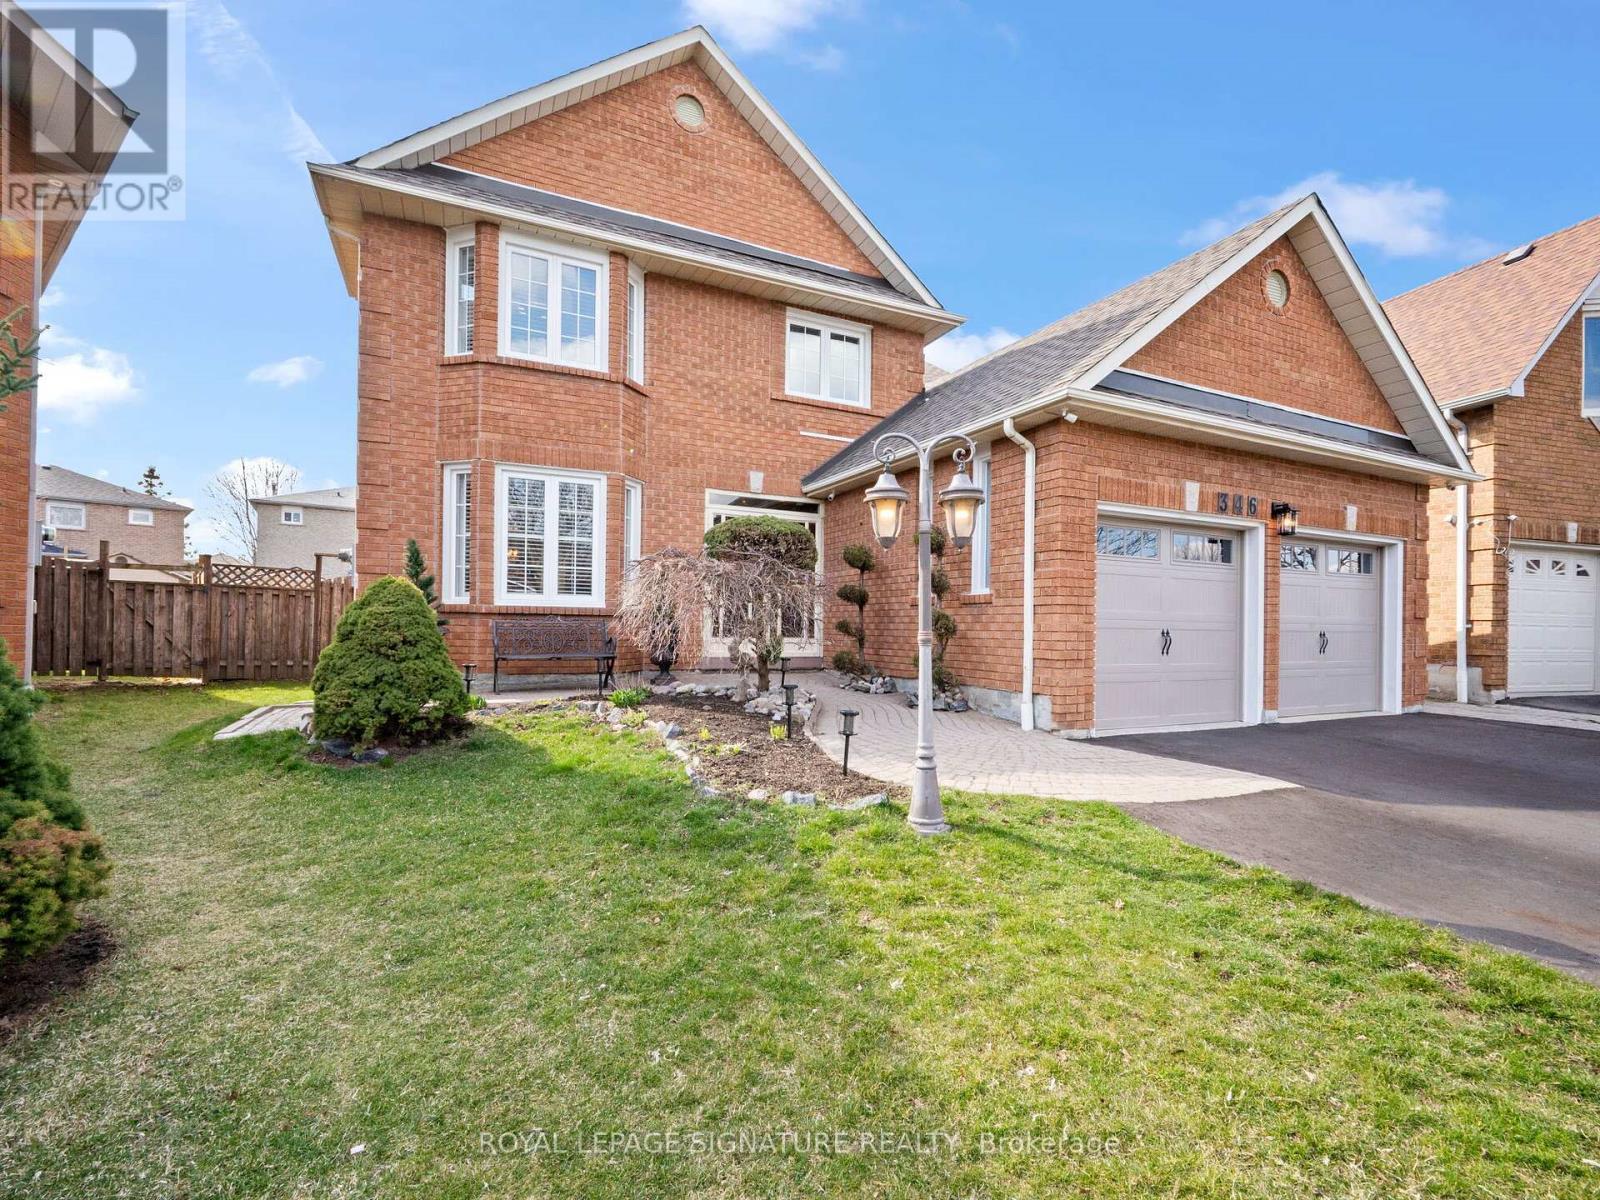 












346 WENDRON CRES

,
Mississauga,




Ontario
L5R3H3

